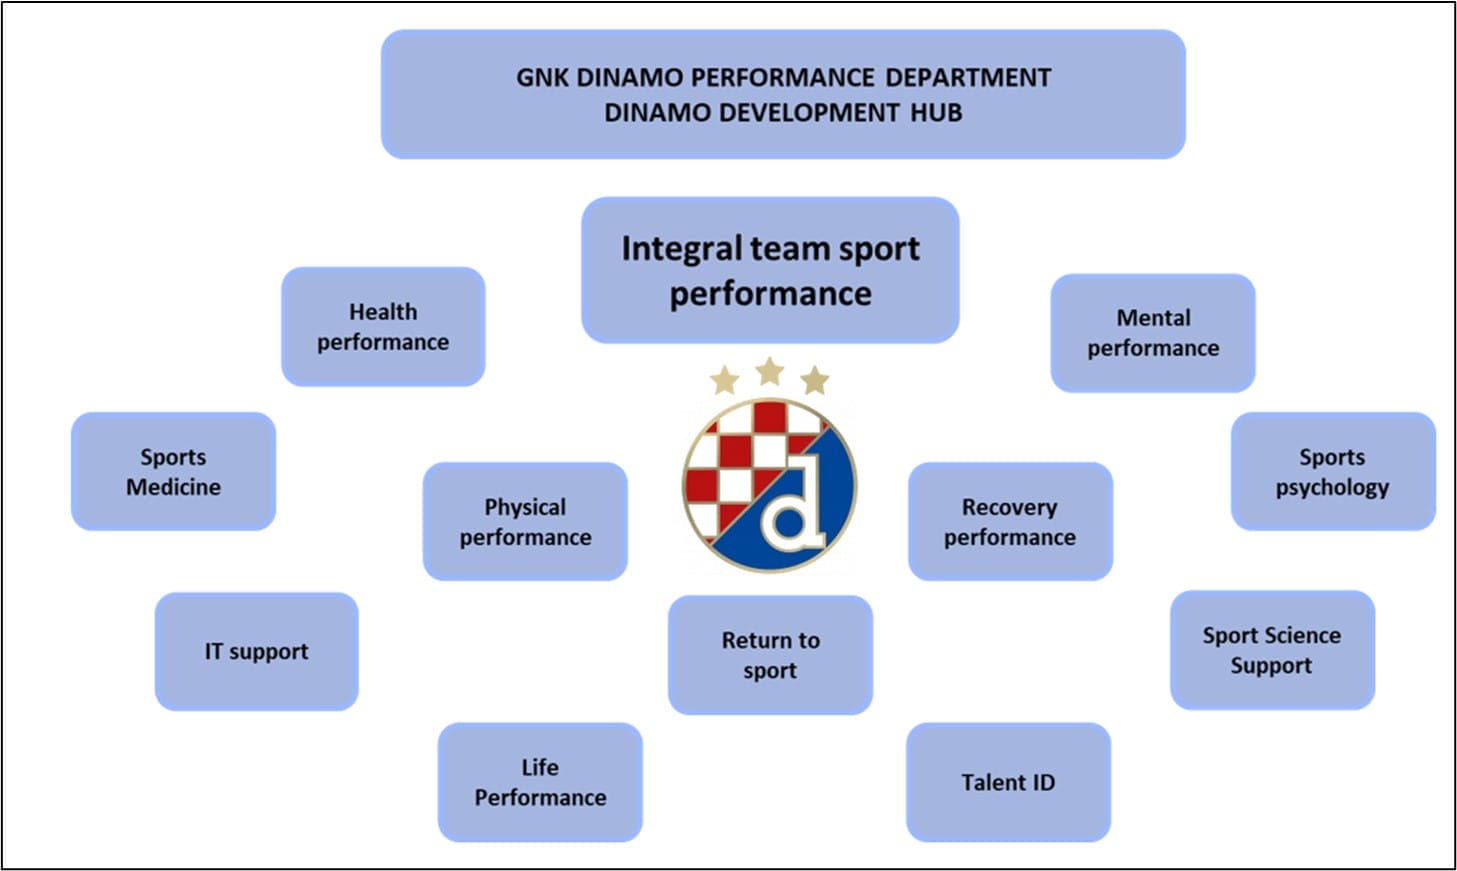 Picture 2. GNK Dinamo High-Performance system